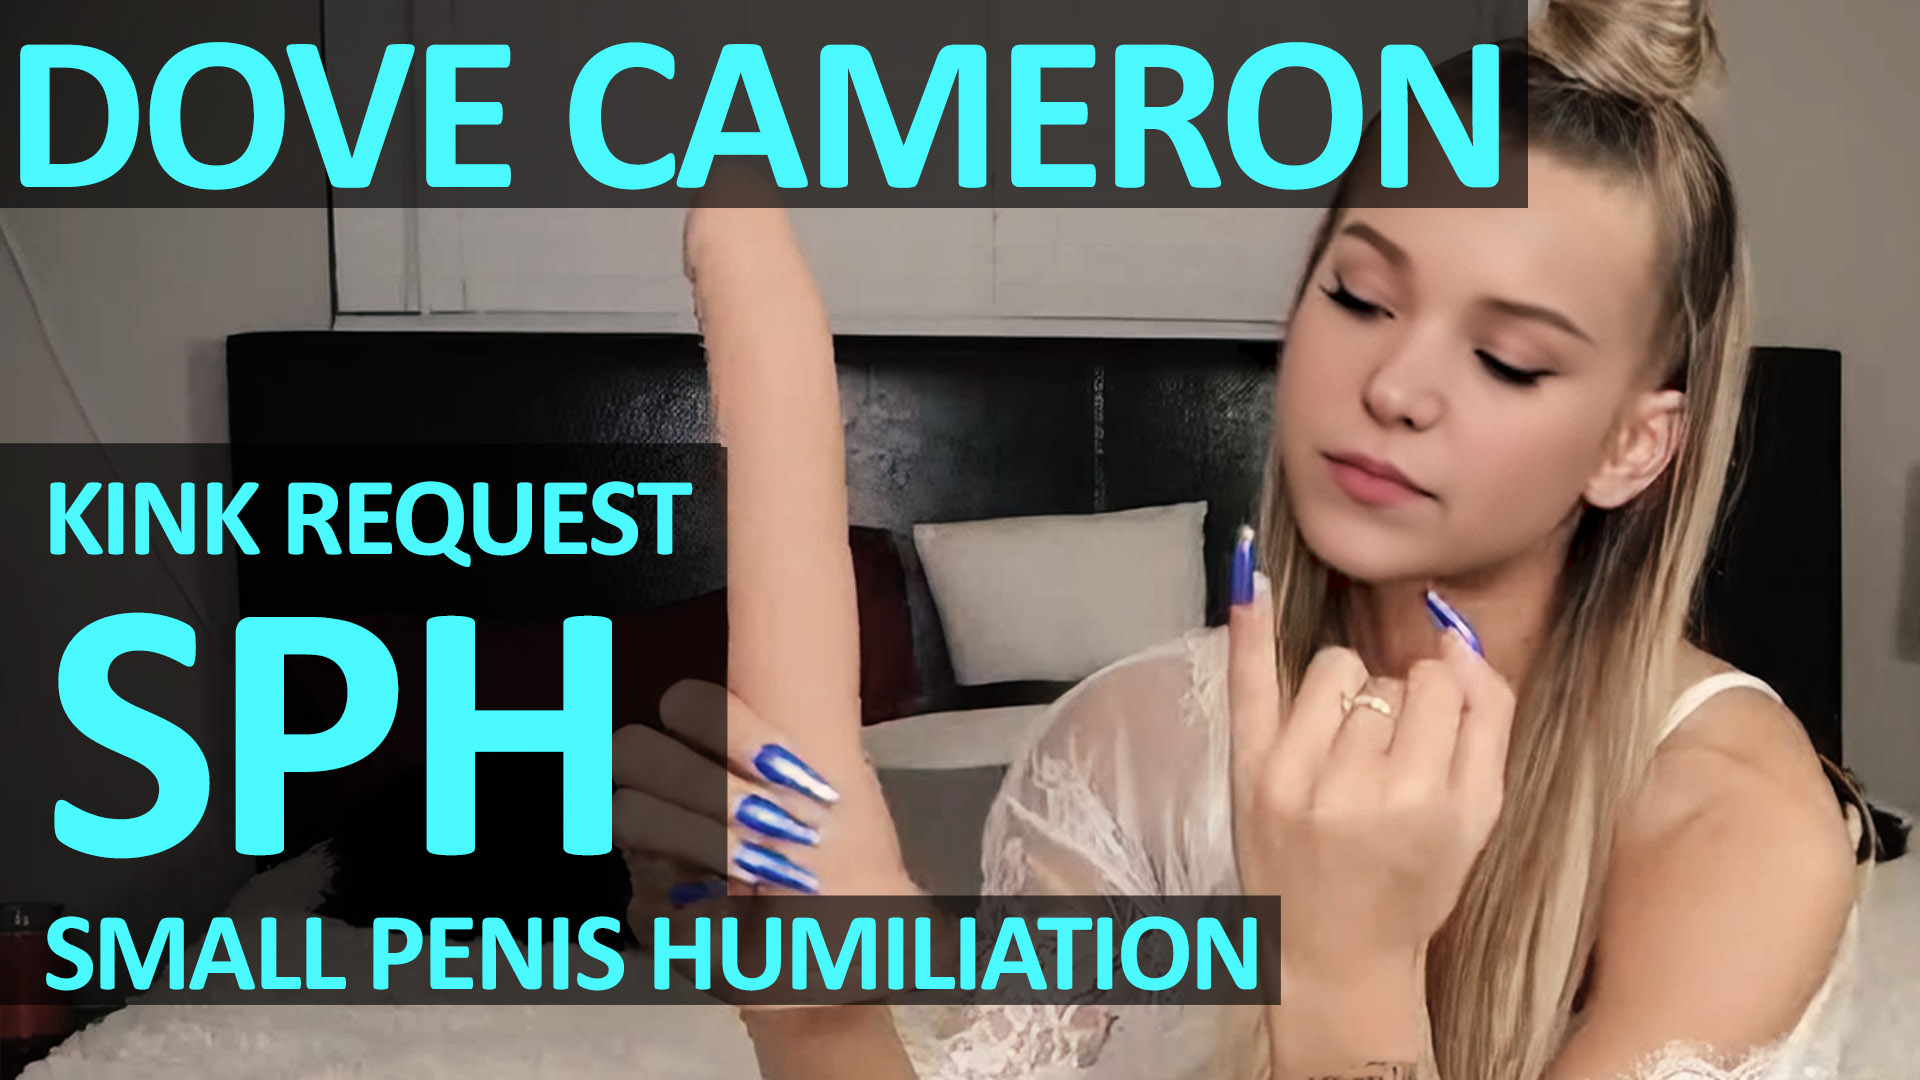 Special: Dove Cameron SPH  (Small Penis Humiliation)